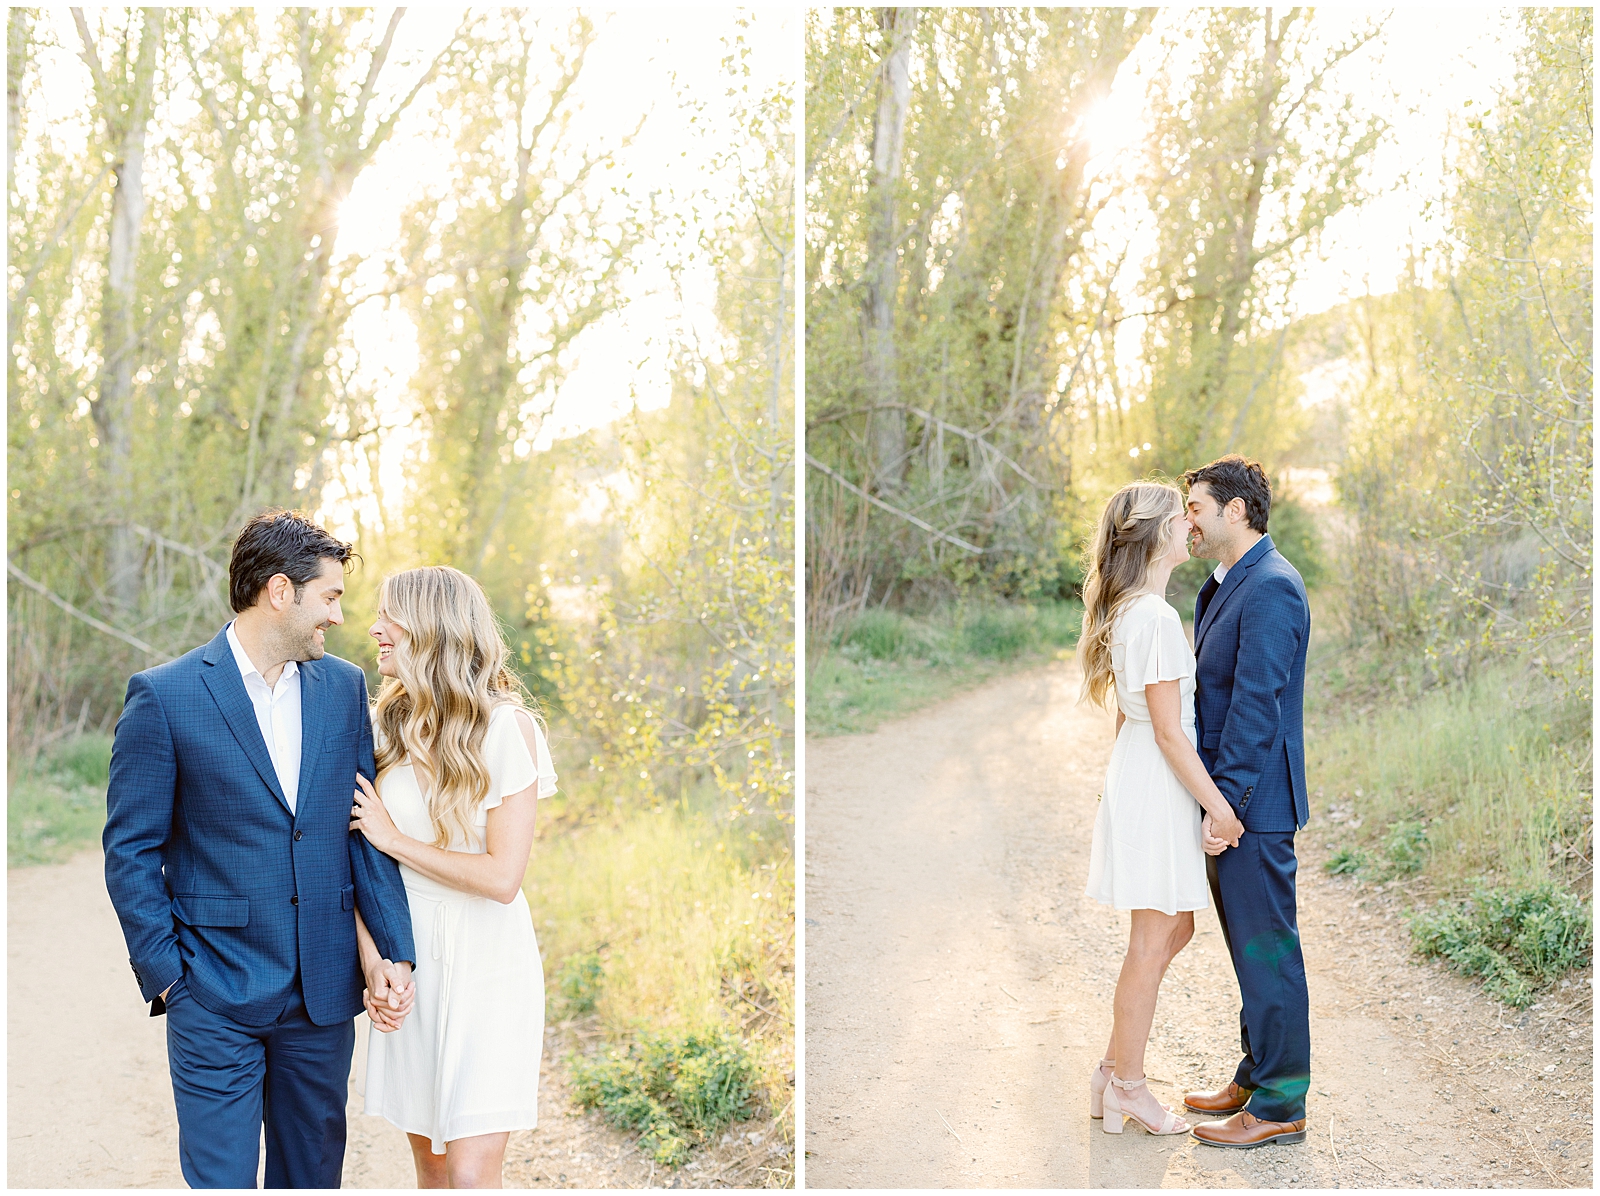 Dreamy Golden Hour Light in the Boise Foothills for this couple's elegant engagement session